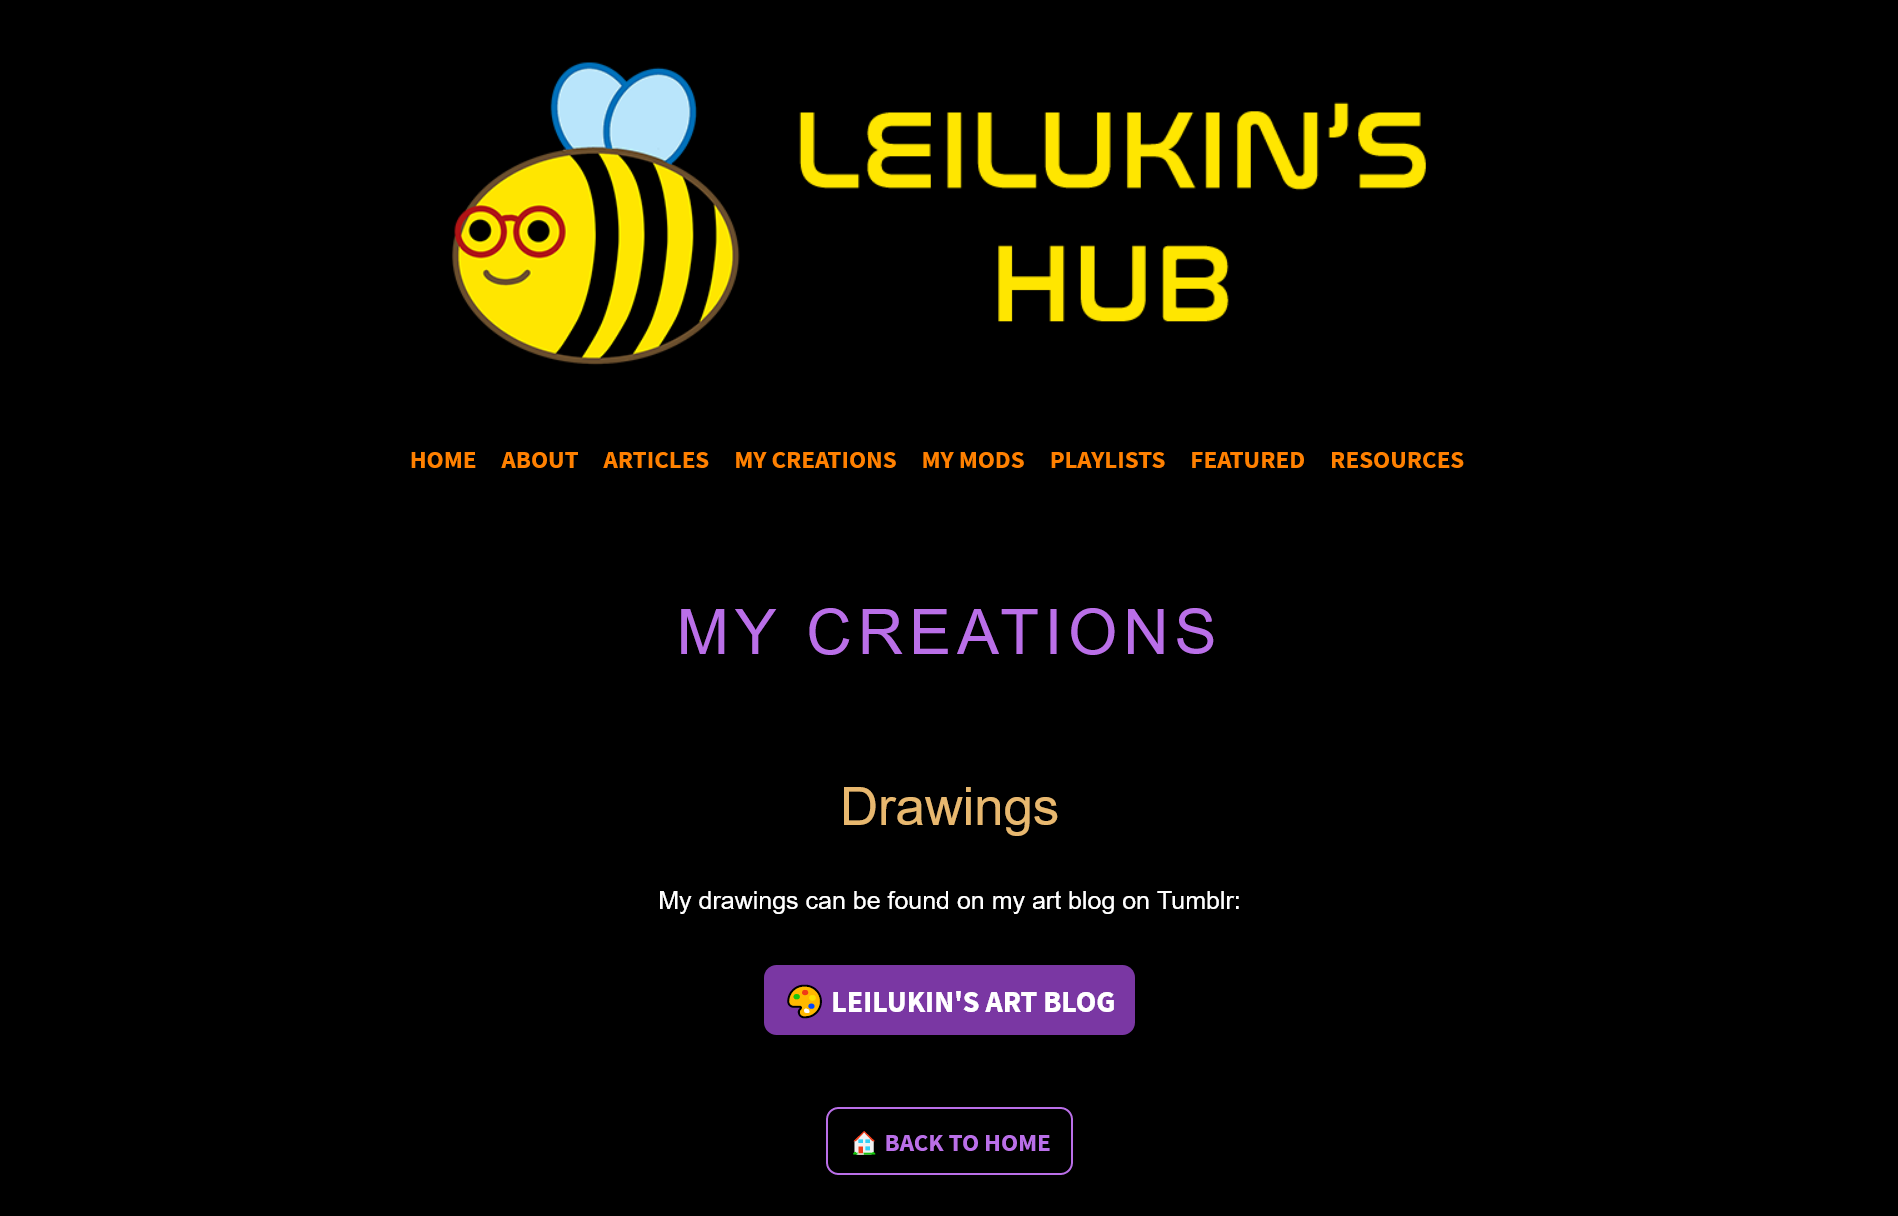 Leilukin's Hub My Creation page during the site's launch on 11 September 2022